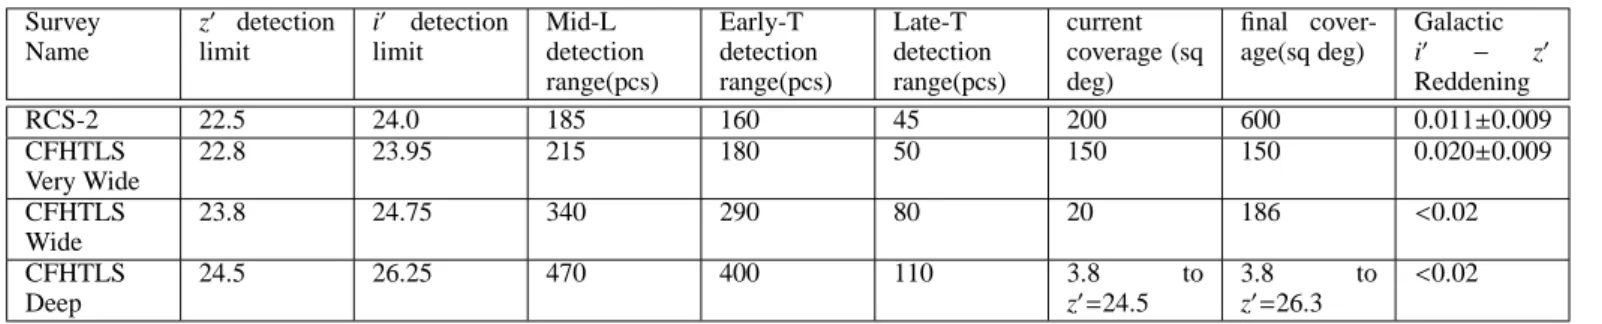 Table 1. Characteristics of the optical surveys used by CFBDS. Survey Name z ′ detectionlimit i ′ detectionlimit Mid-L detection range(pcs) Early-T detection range(pcs) Late-T detection range(pcs) current coverage (sqdeg) final cover-age(sq deg) Galactici′